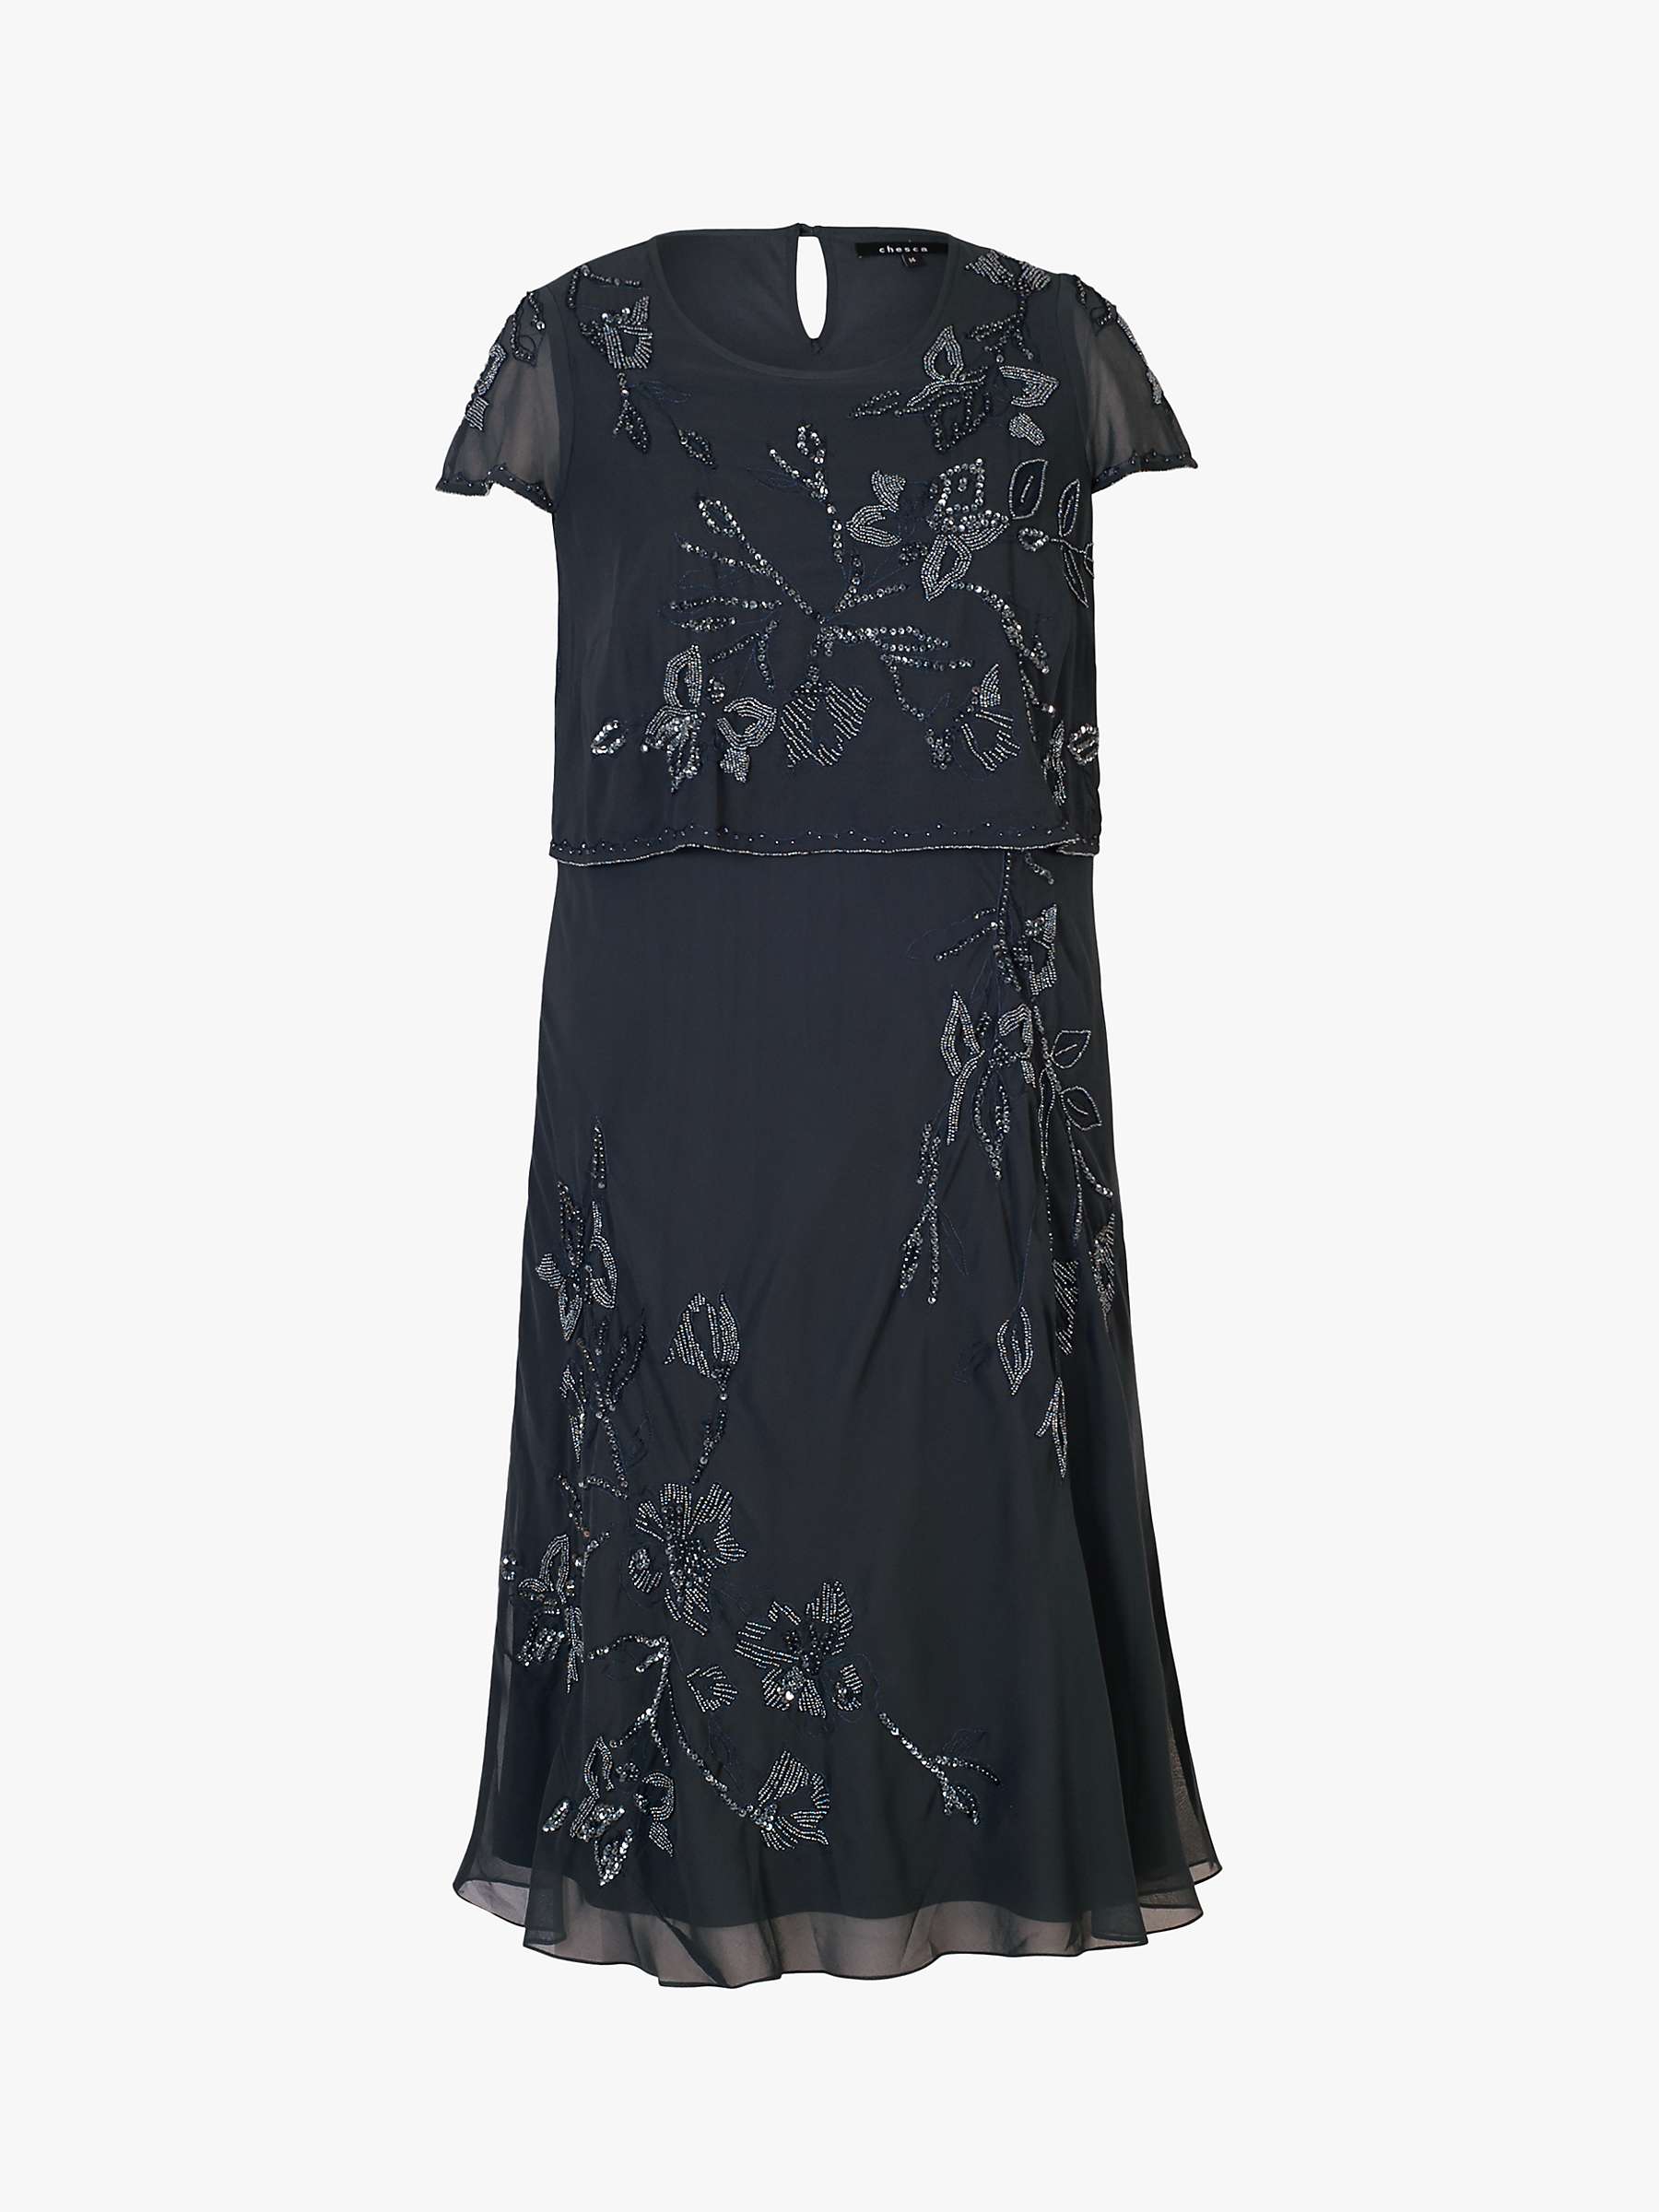 Buy chesca Lily Beaded Layered Dress, Pewter Online at johnlewis.com